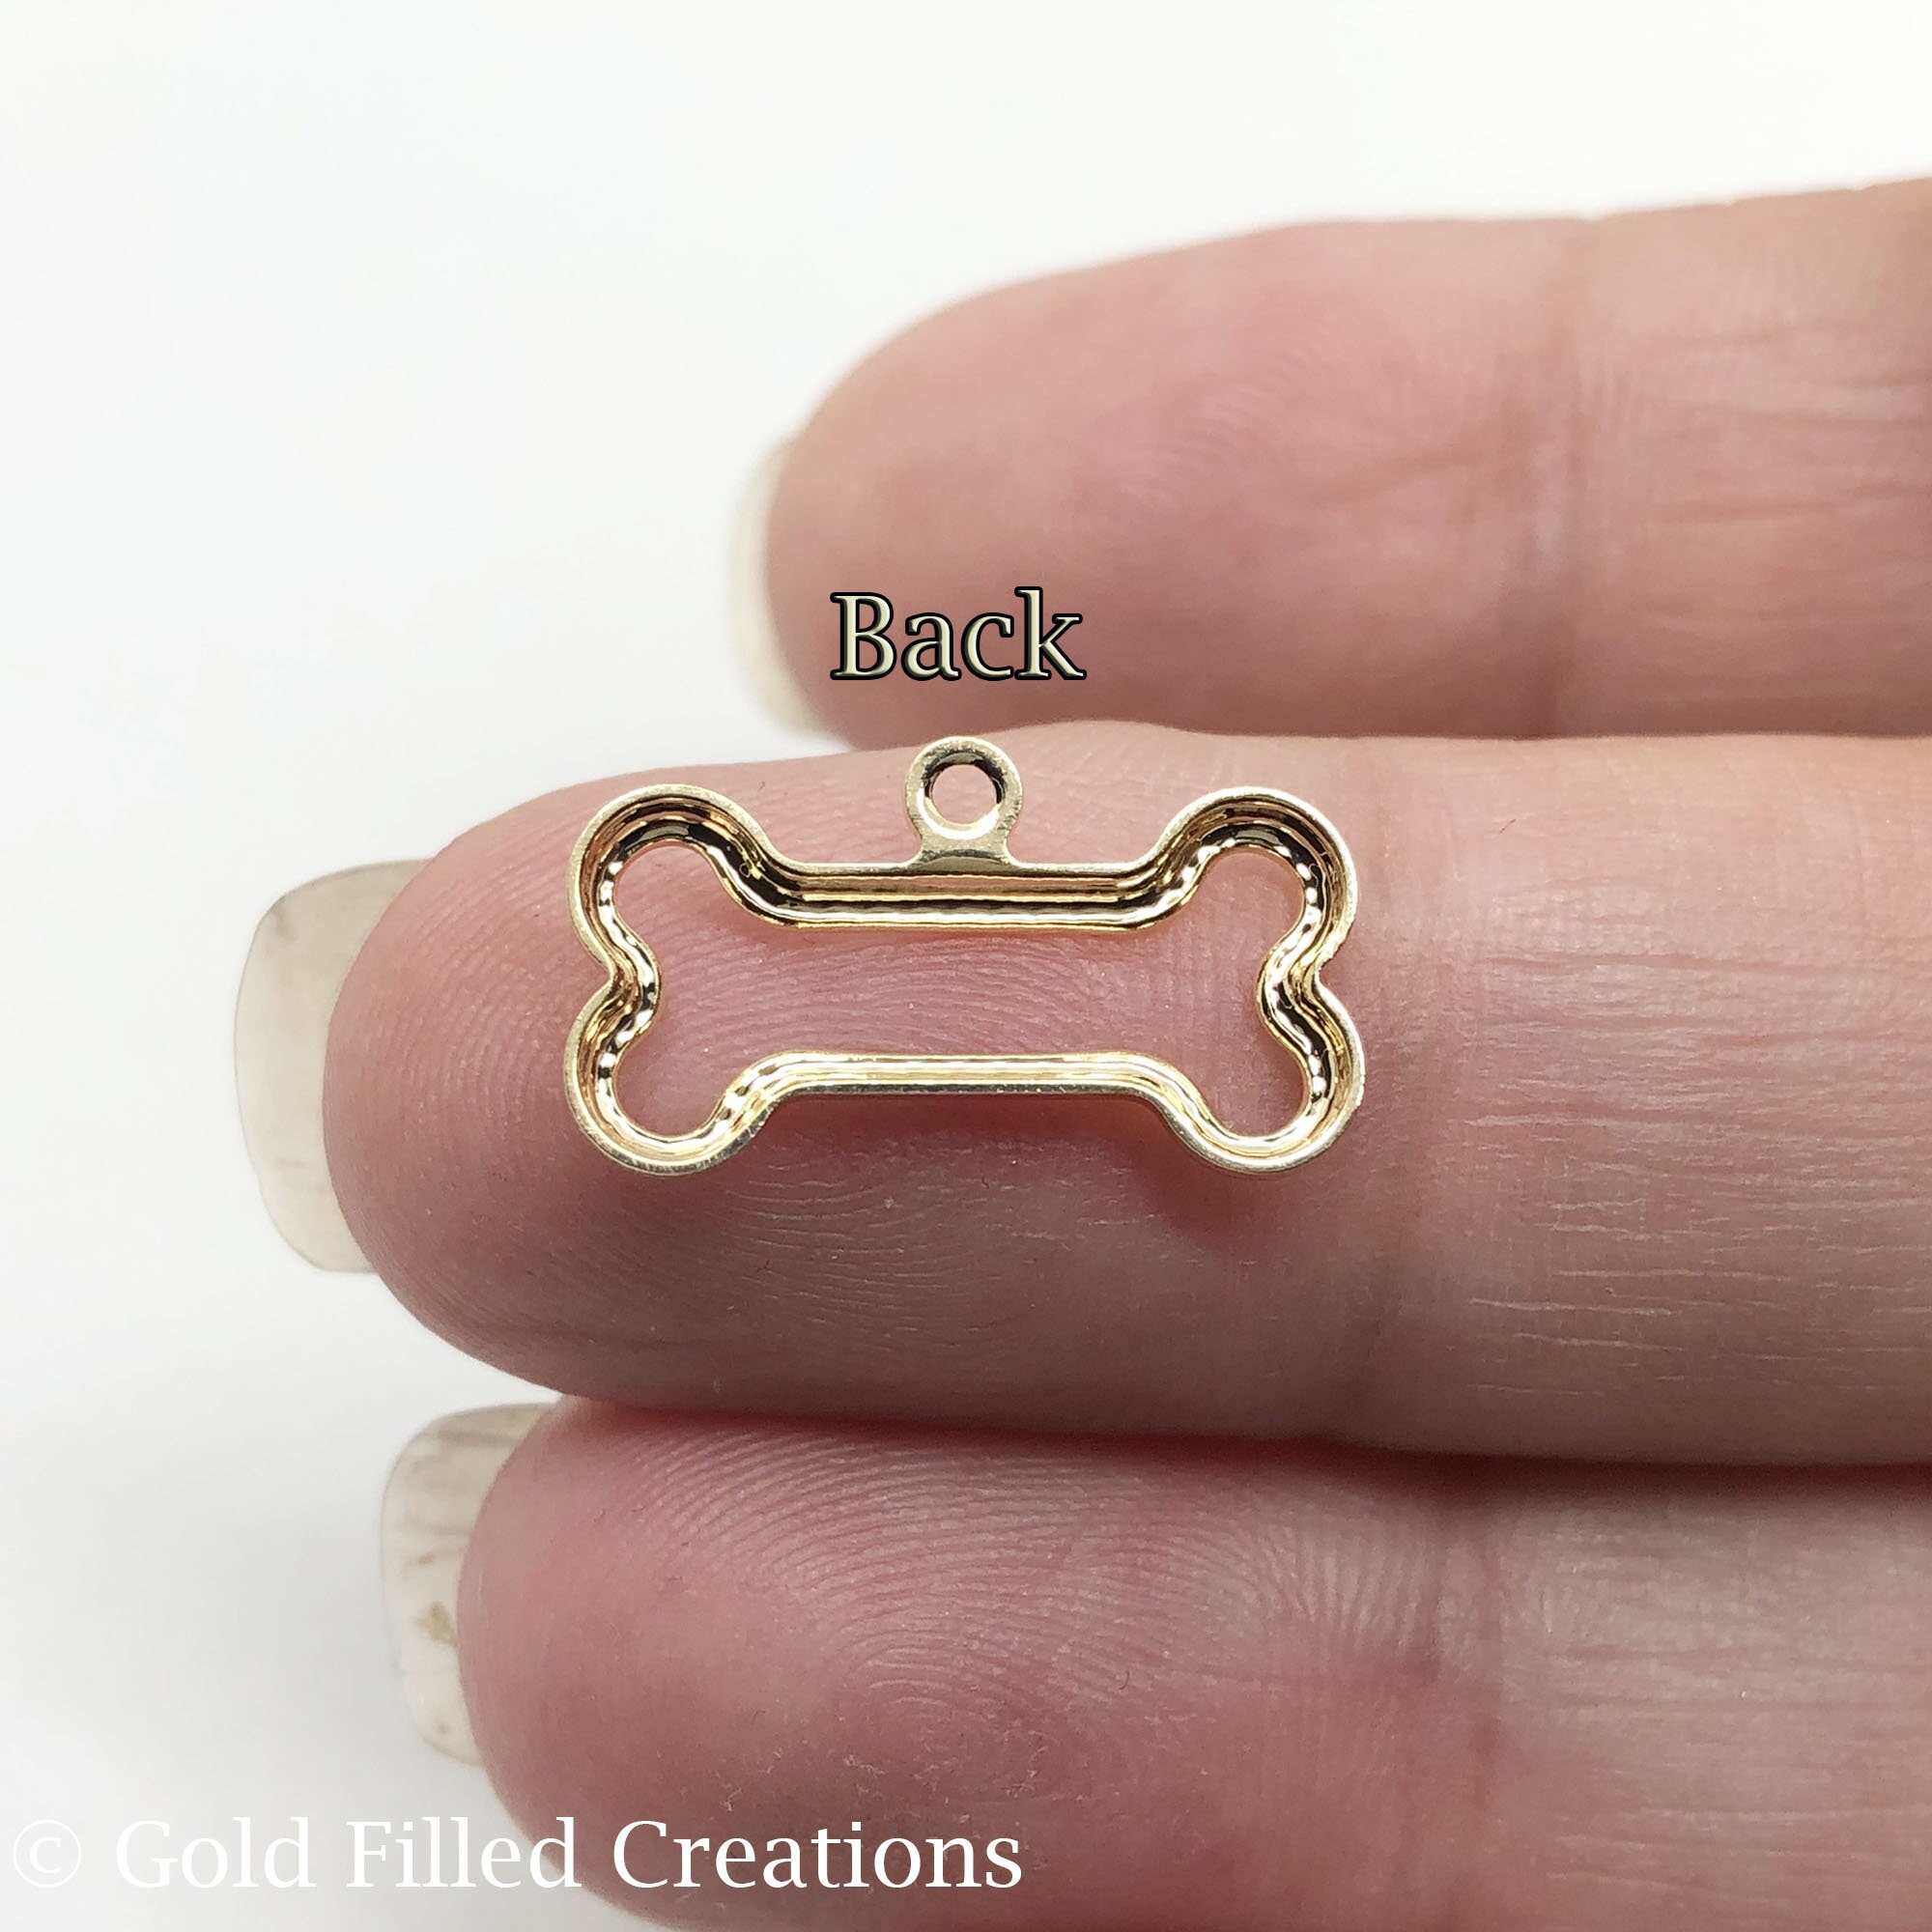 100 % Gold Filled Bone Charms Pendant